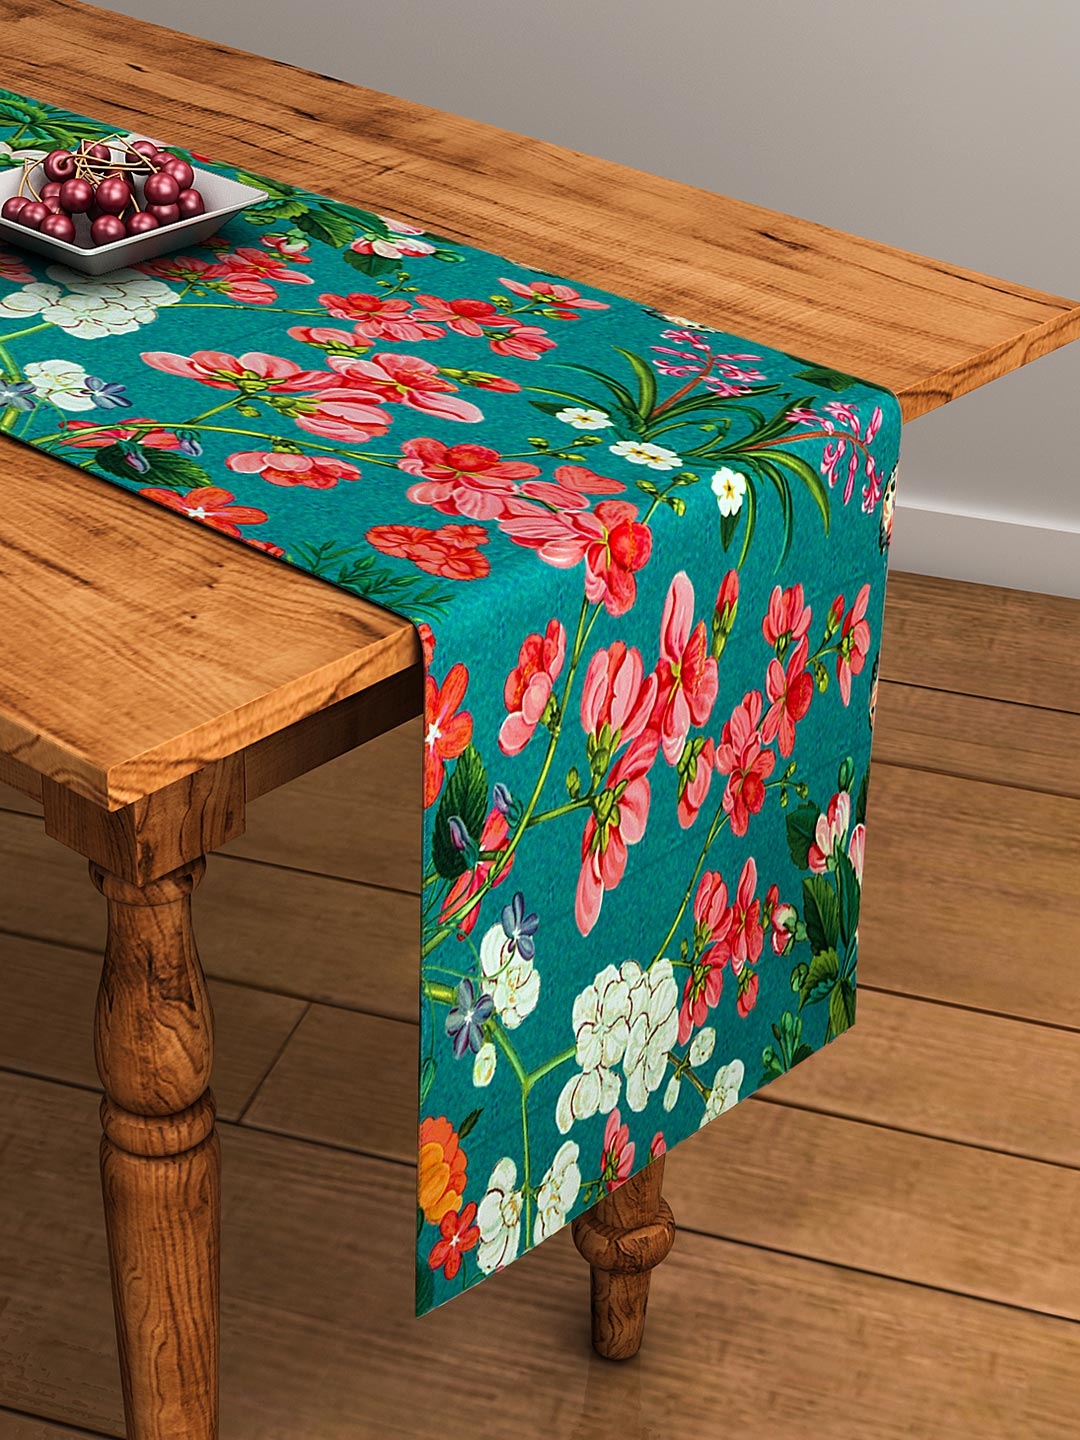 Floral Prints in Table Runners